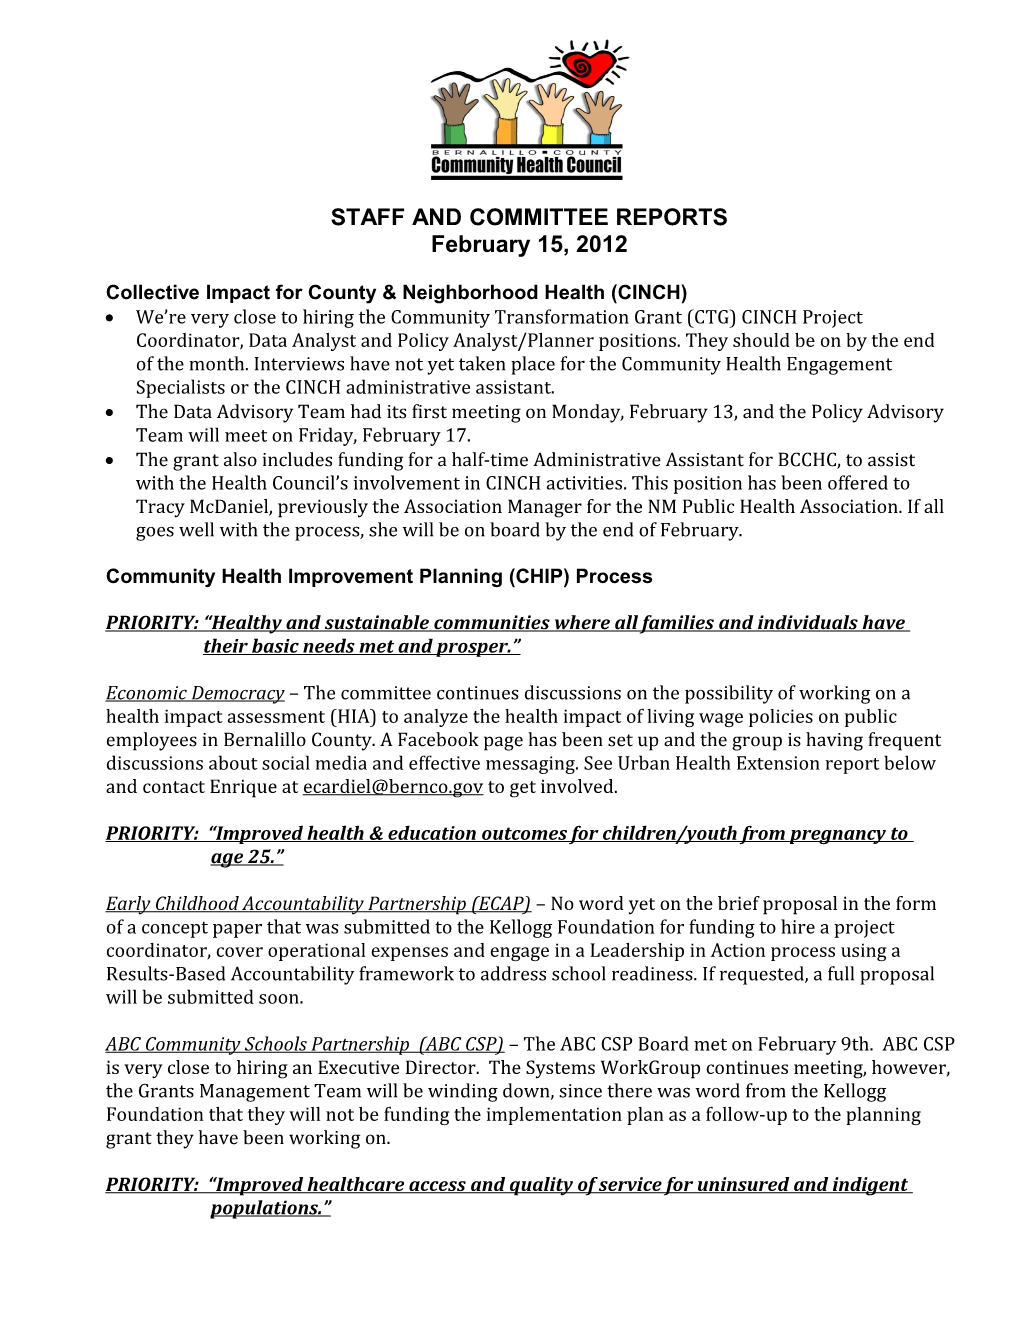 STAFF and COMMITTEE REPORTS February 15, 2012